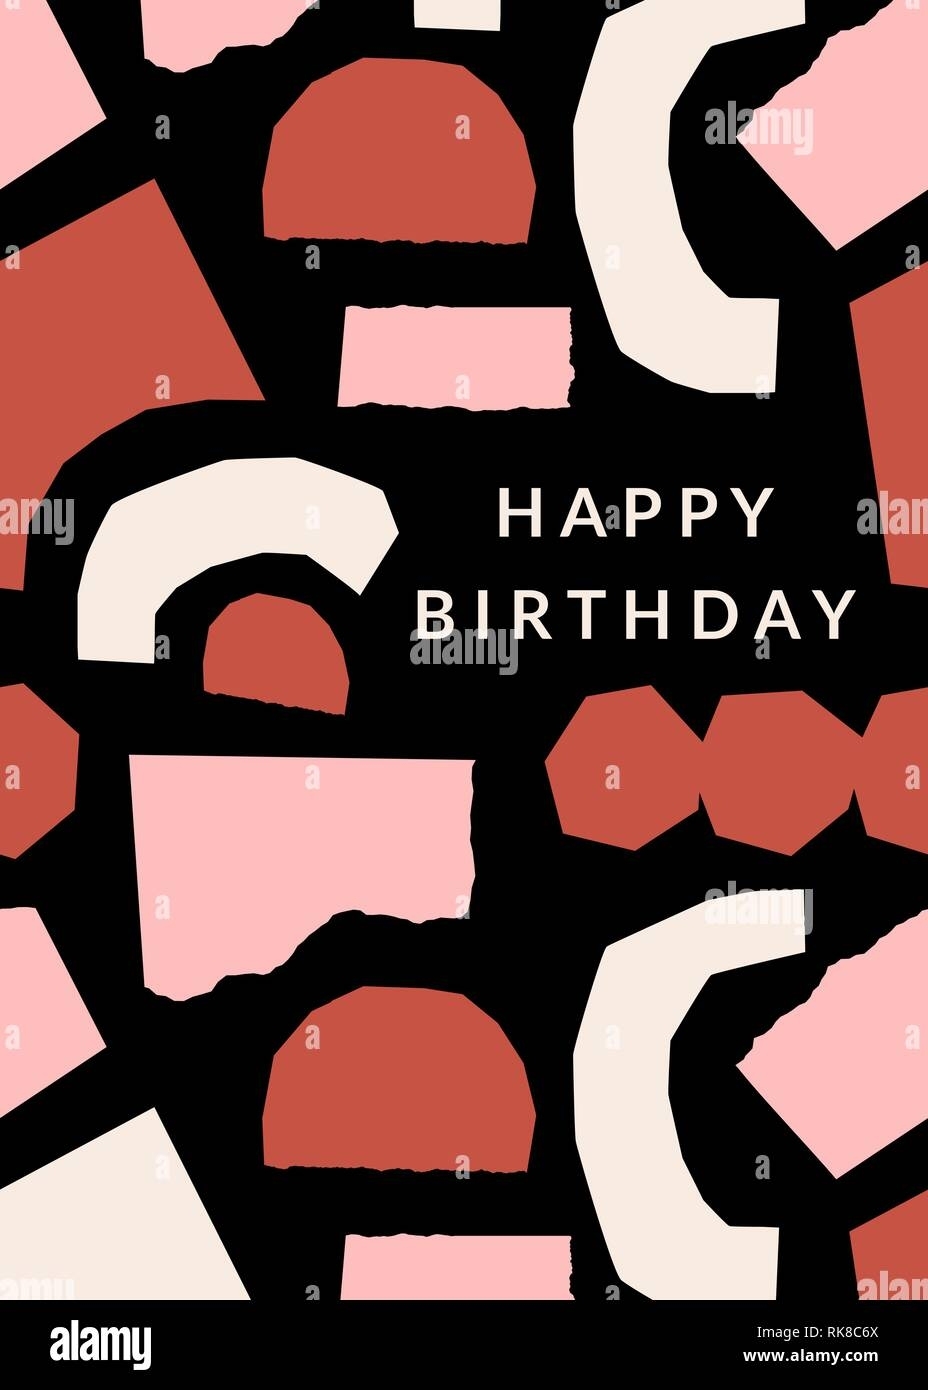 Greeting Card Template With Paper Cut Shapes In Cream, Pastel Pink And Regarding Birthday Card Collage Template